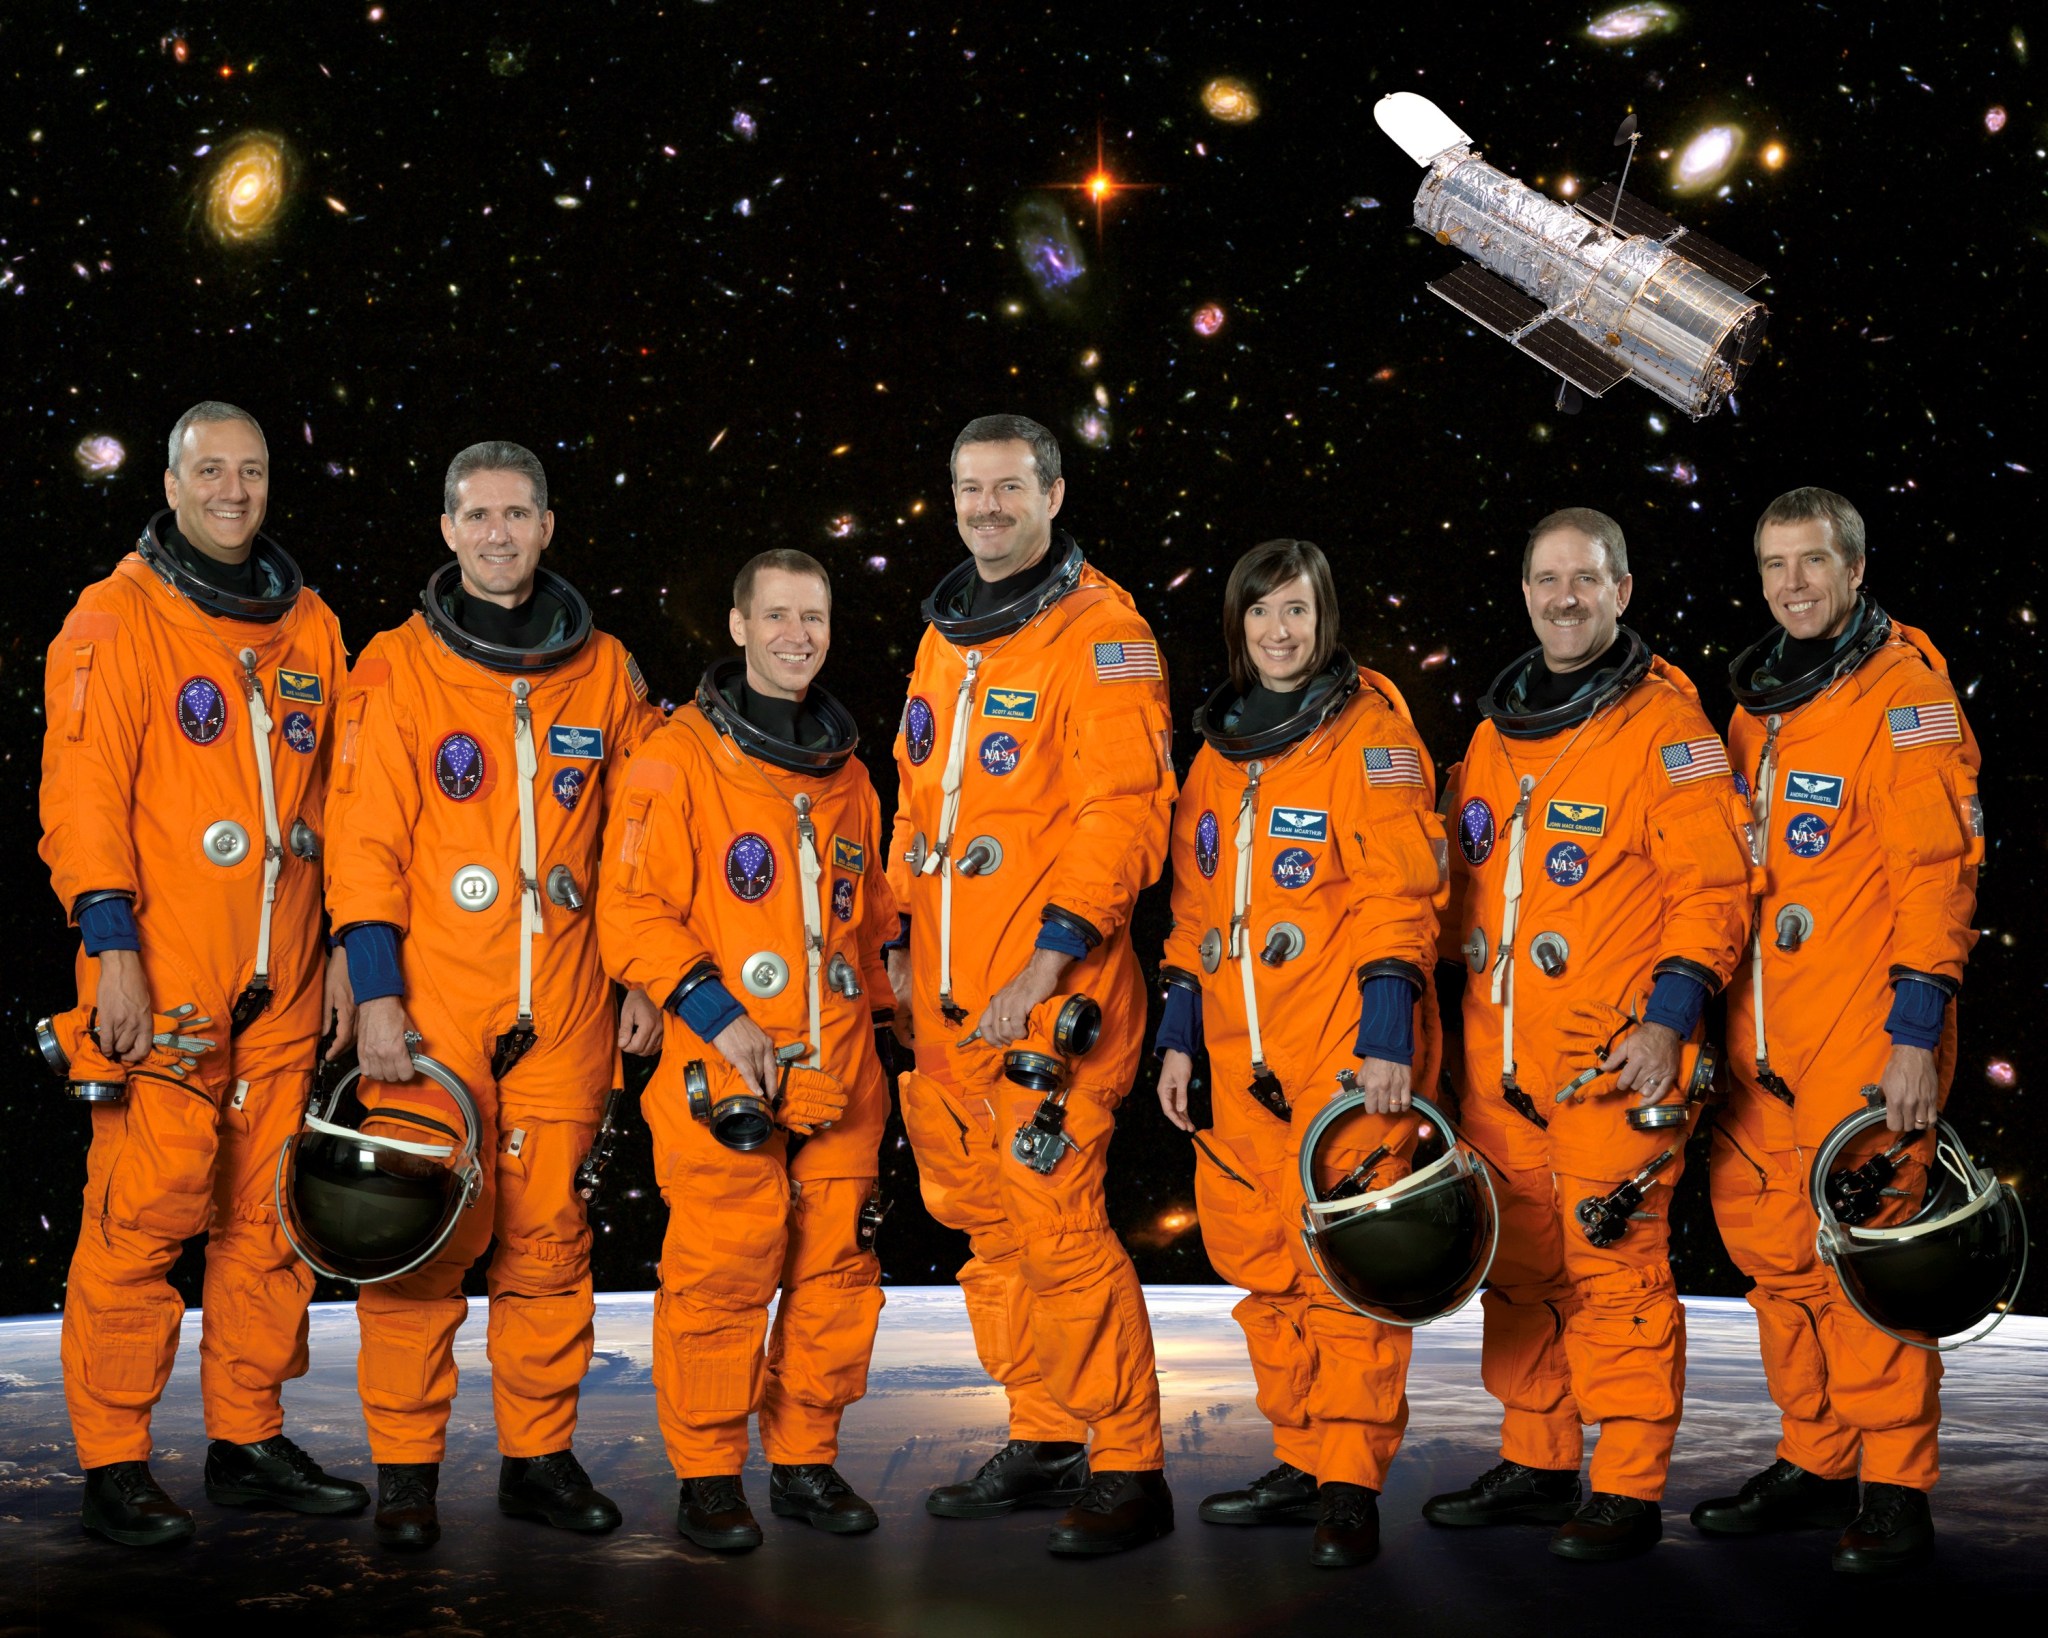 Six men and one woman in orange flight suits, some holding their helmets, standing in front of a space background with the Hubble Space Telescope in the image.